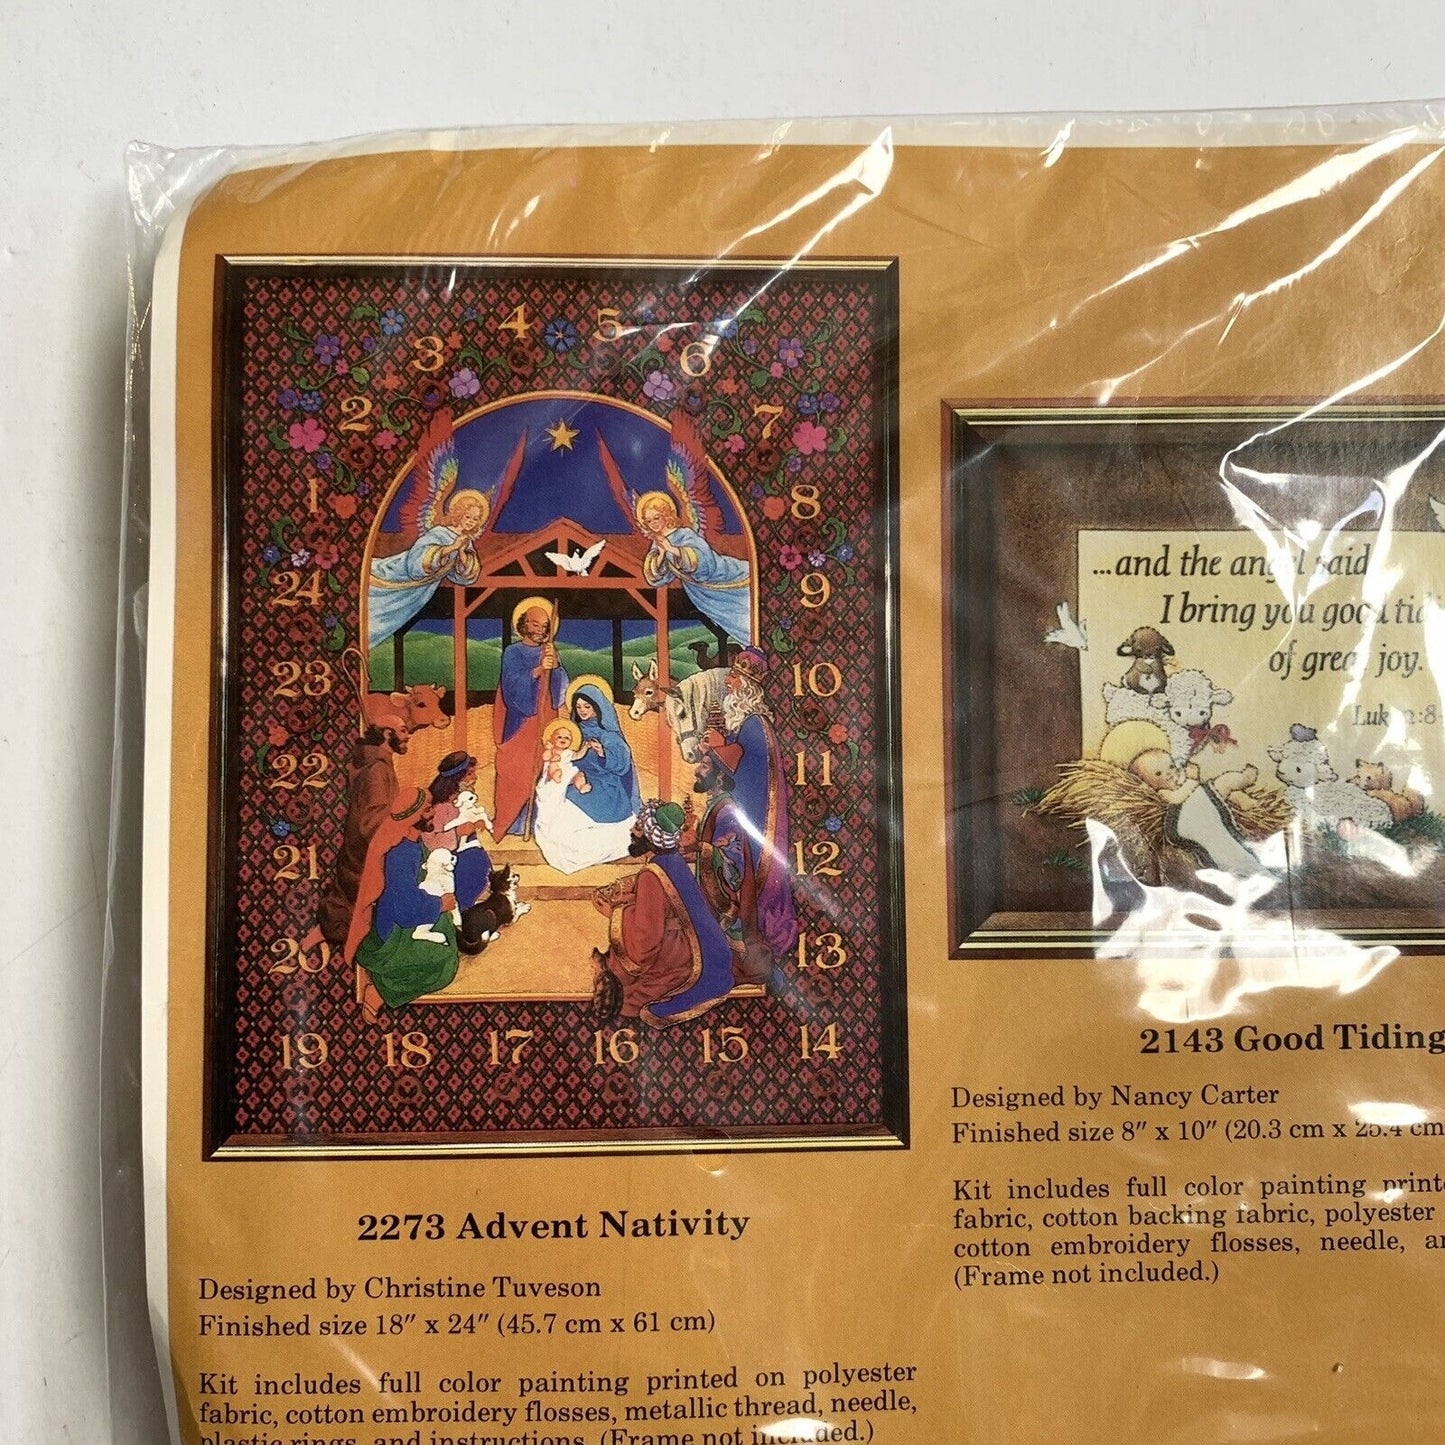 New Vintage The Creative Circle 2273 Advent Nativity Embroidery Craft Kit